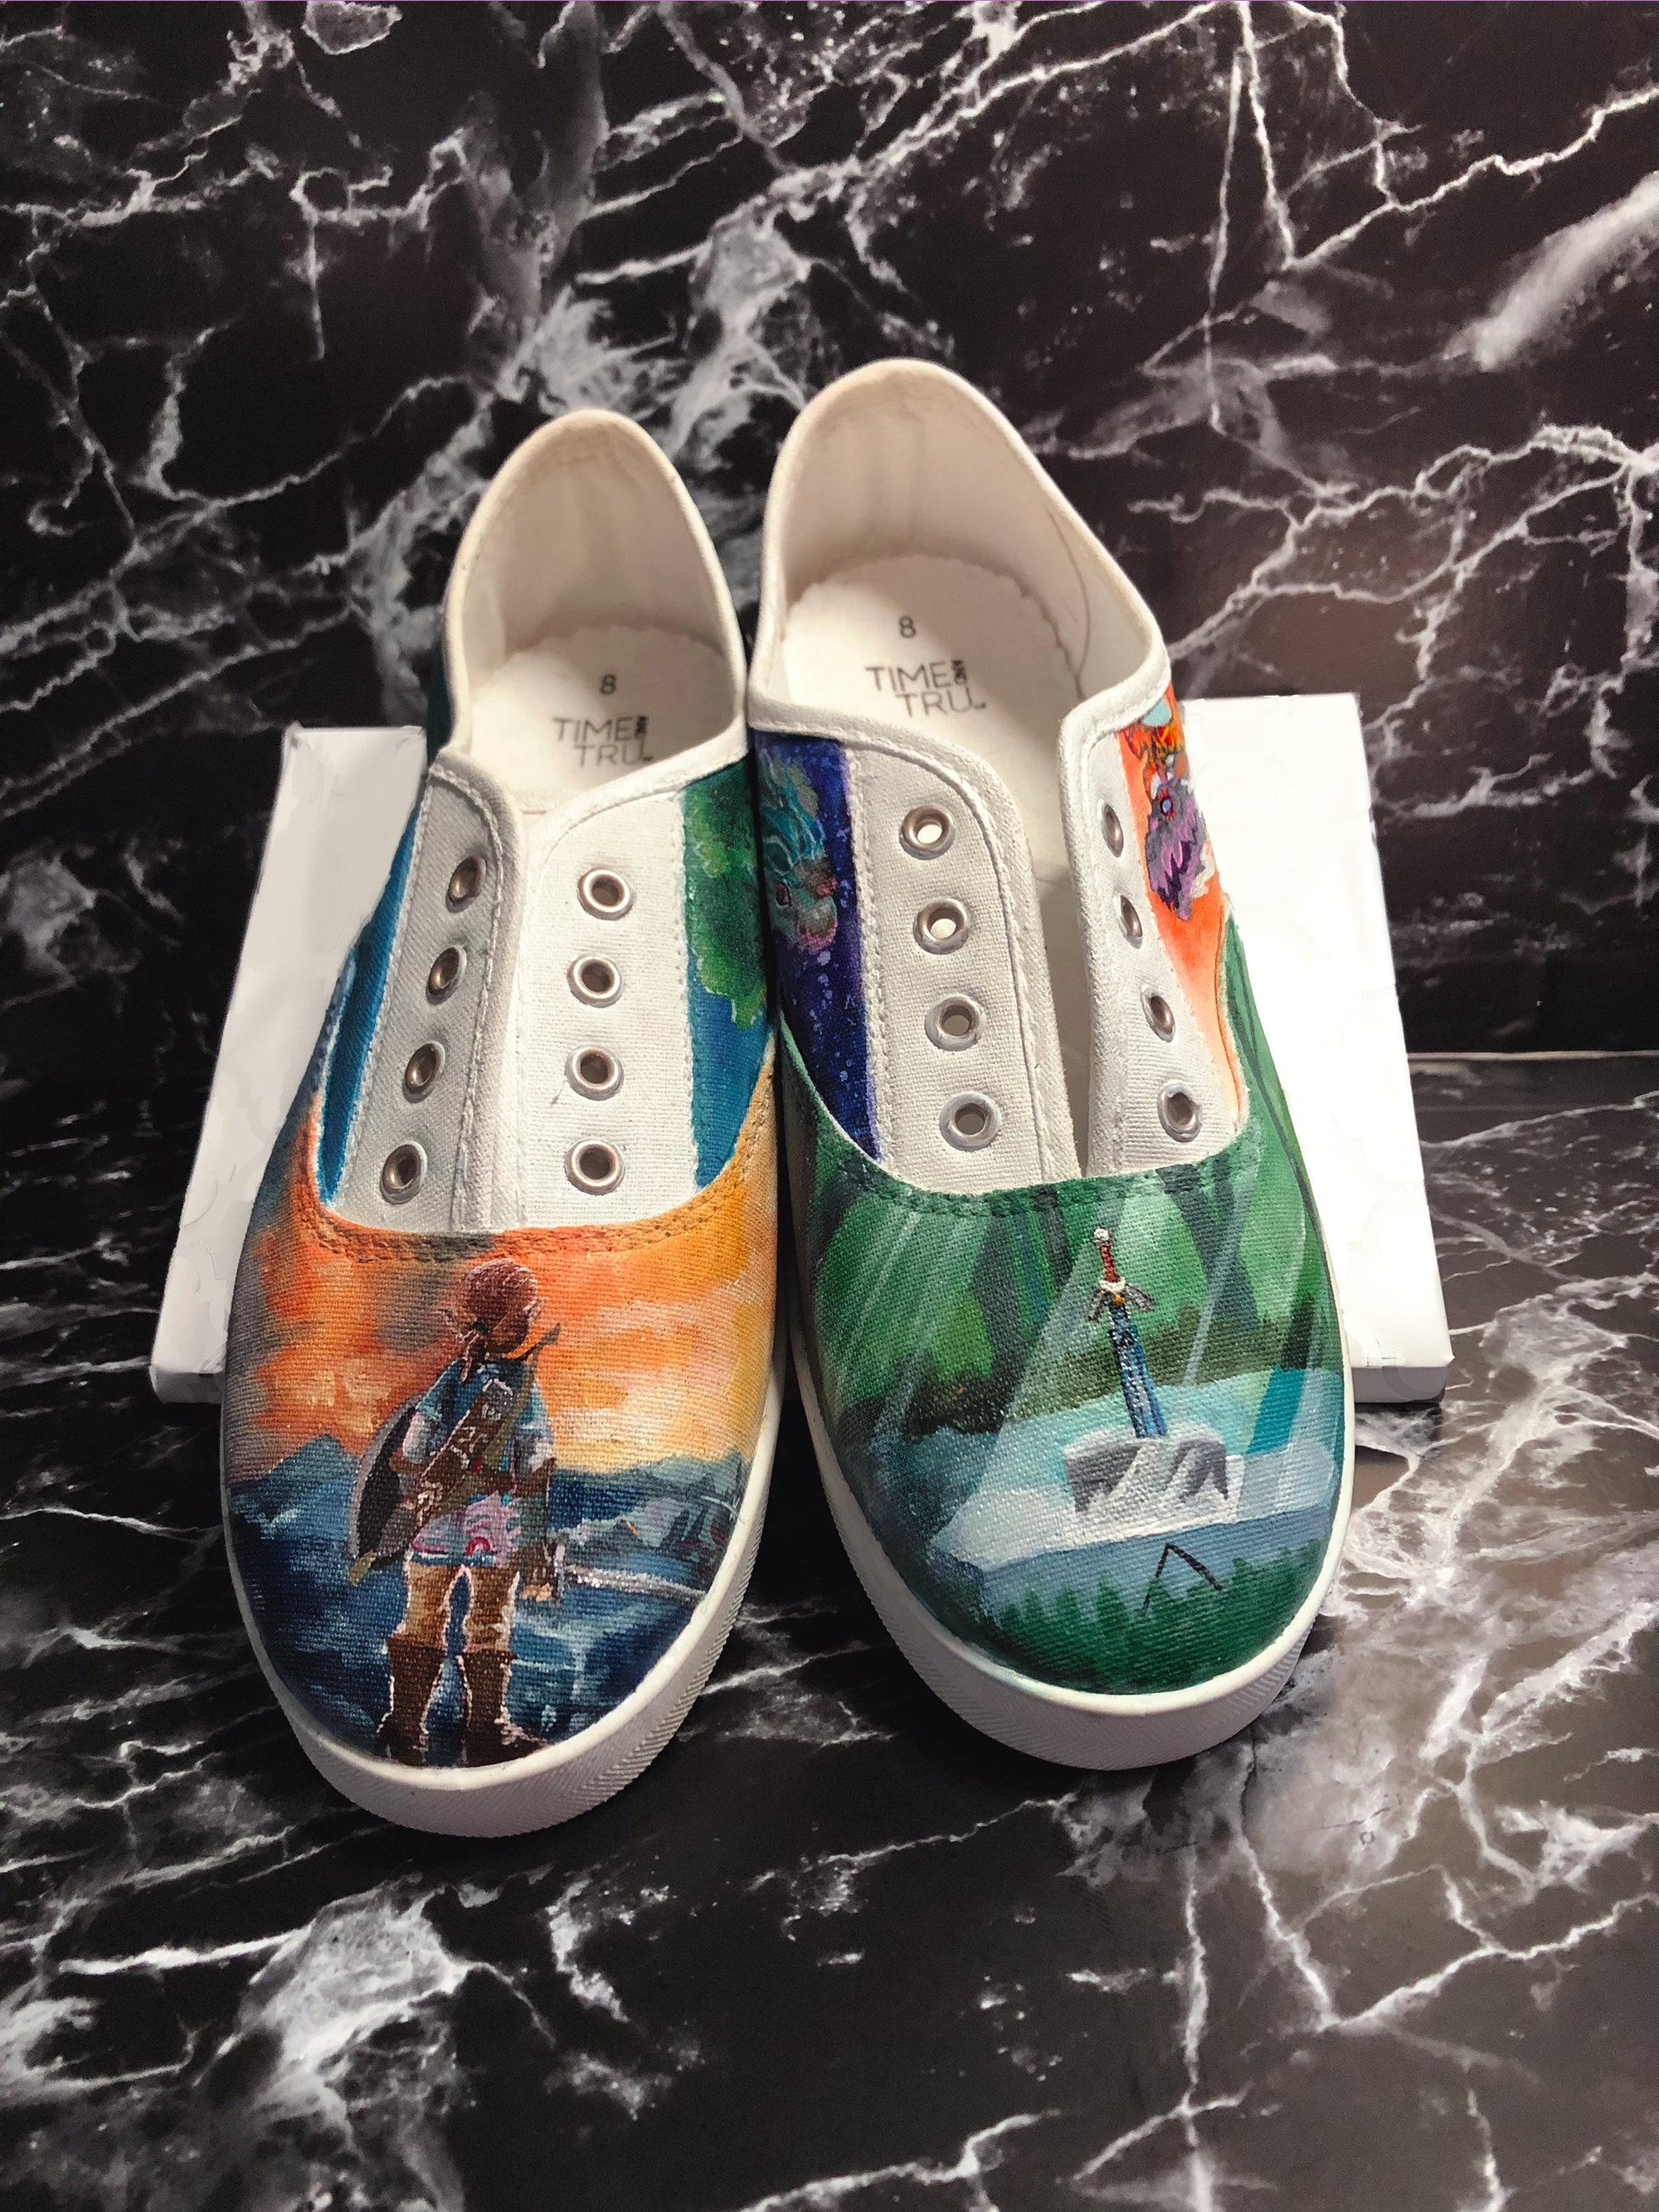 Legends of Zelda: Breath of the Wild Shoes Custom Painted - Etsy